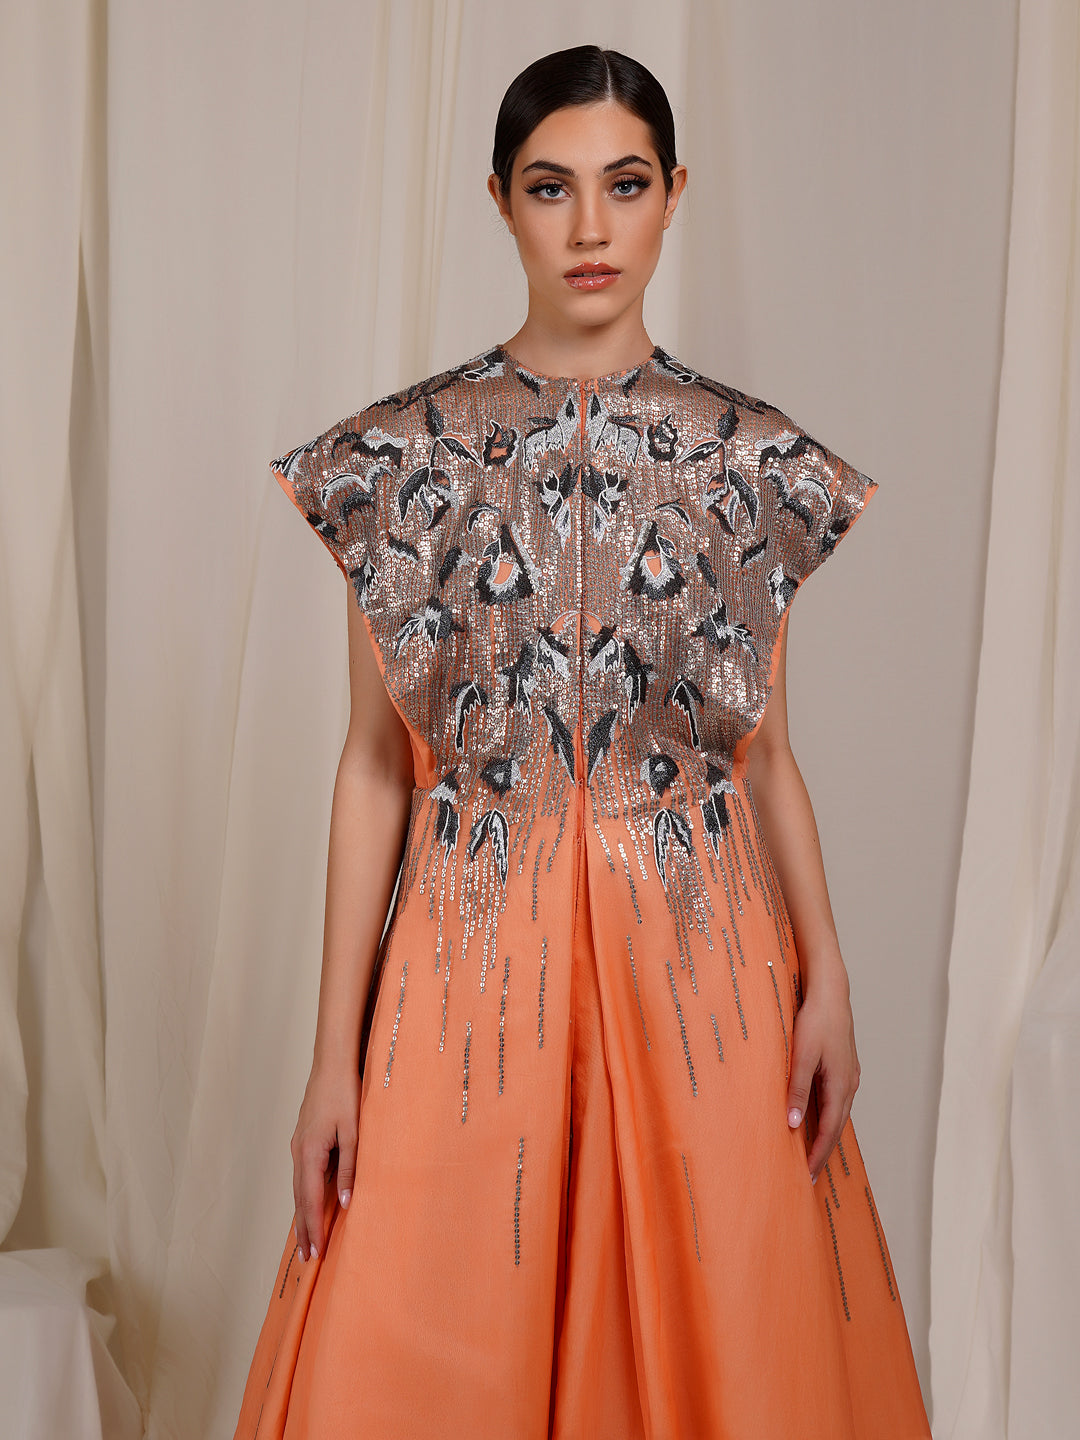 A Peach organza Silk Jacket Gown With Sturdy And Extended Shoulders